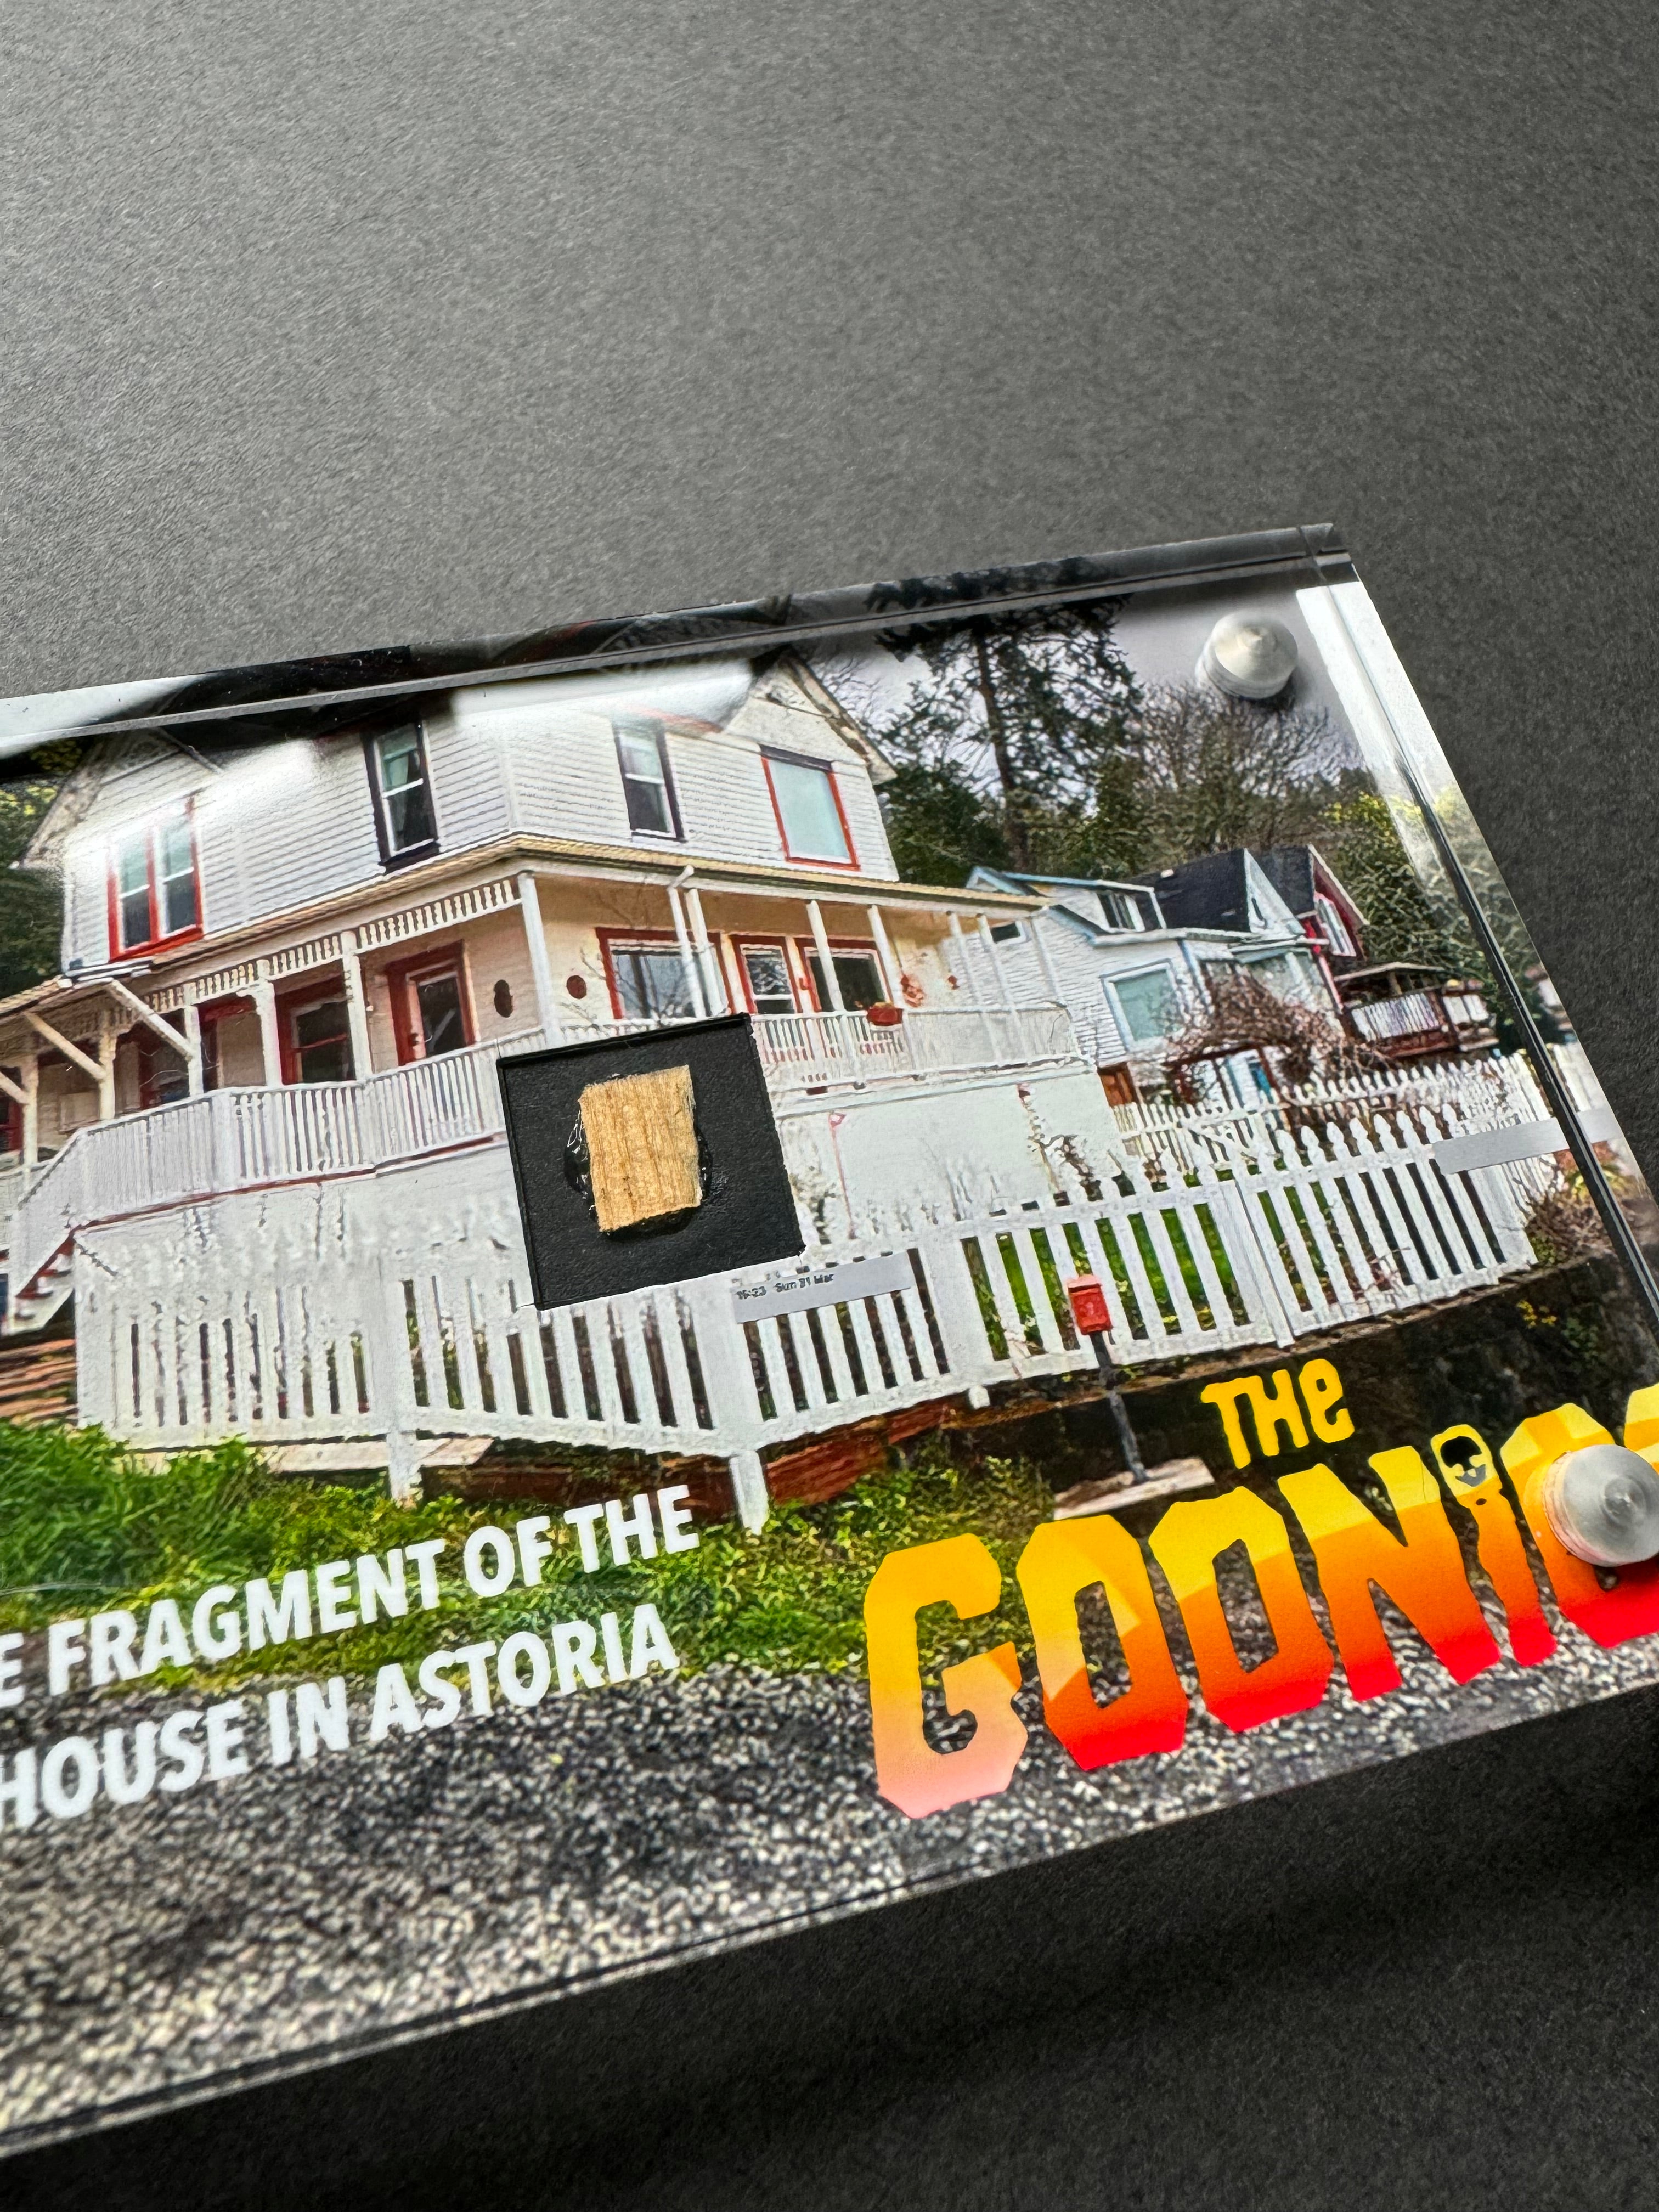 The Goonies (1985) - A Fragment of the Iconic House